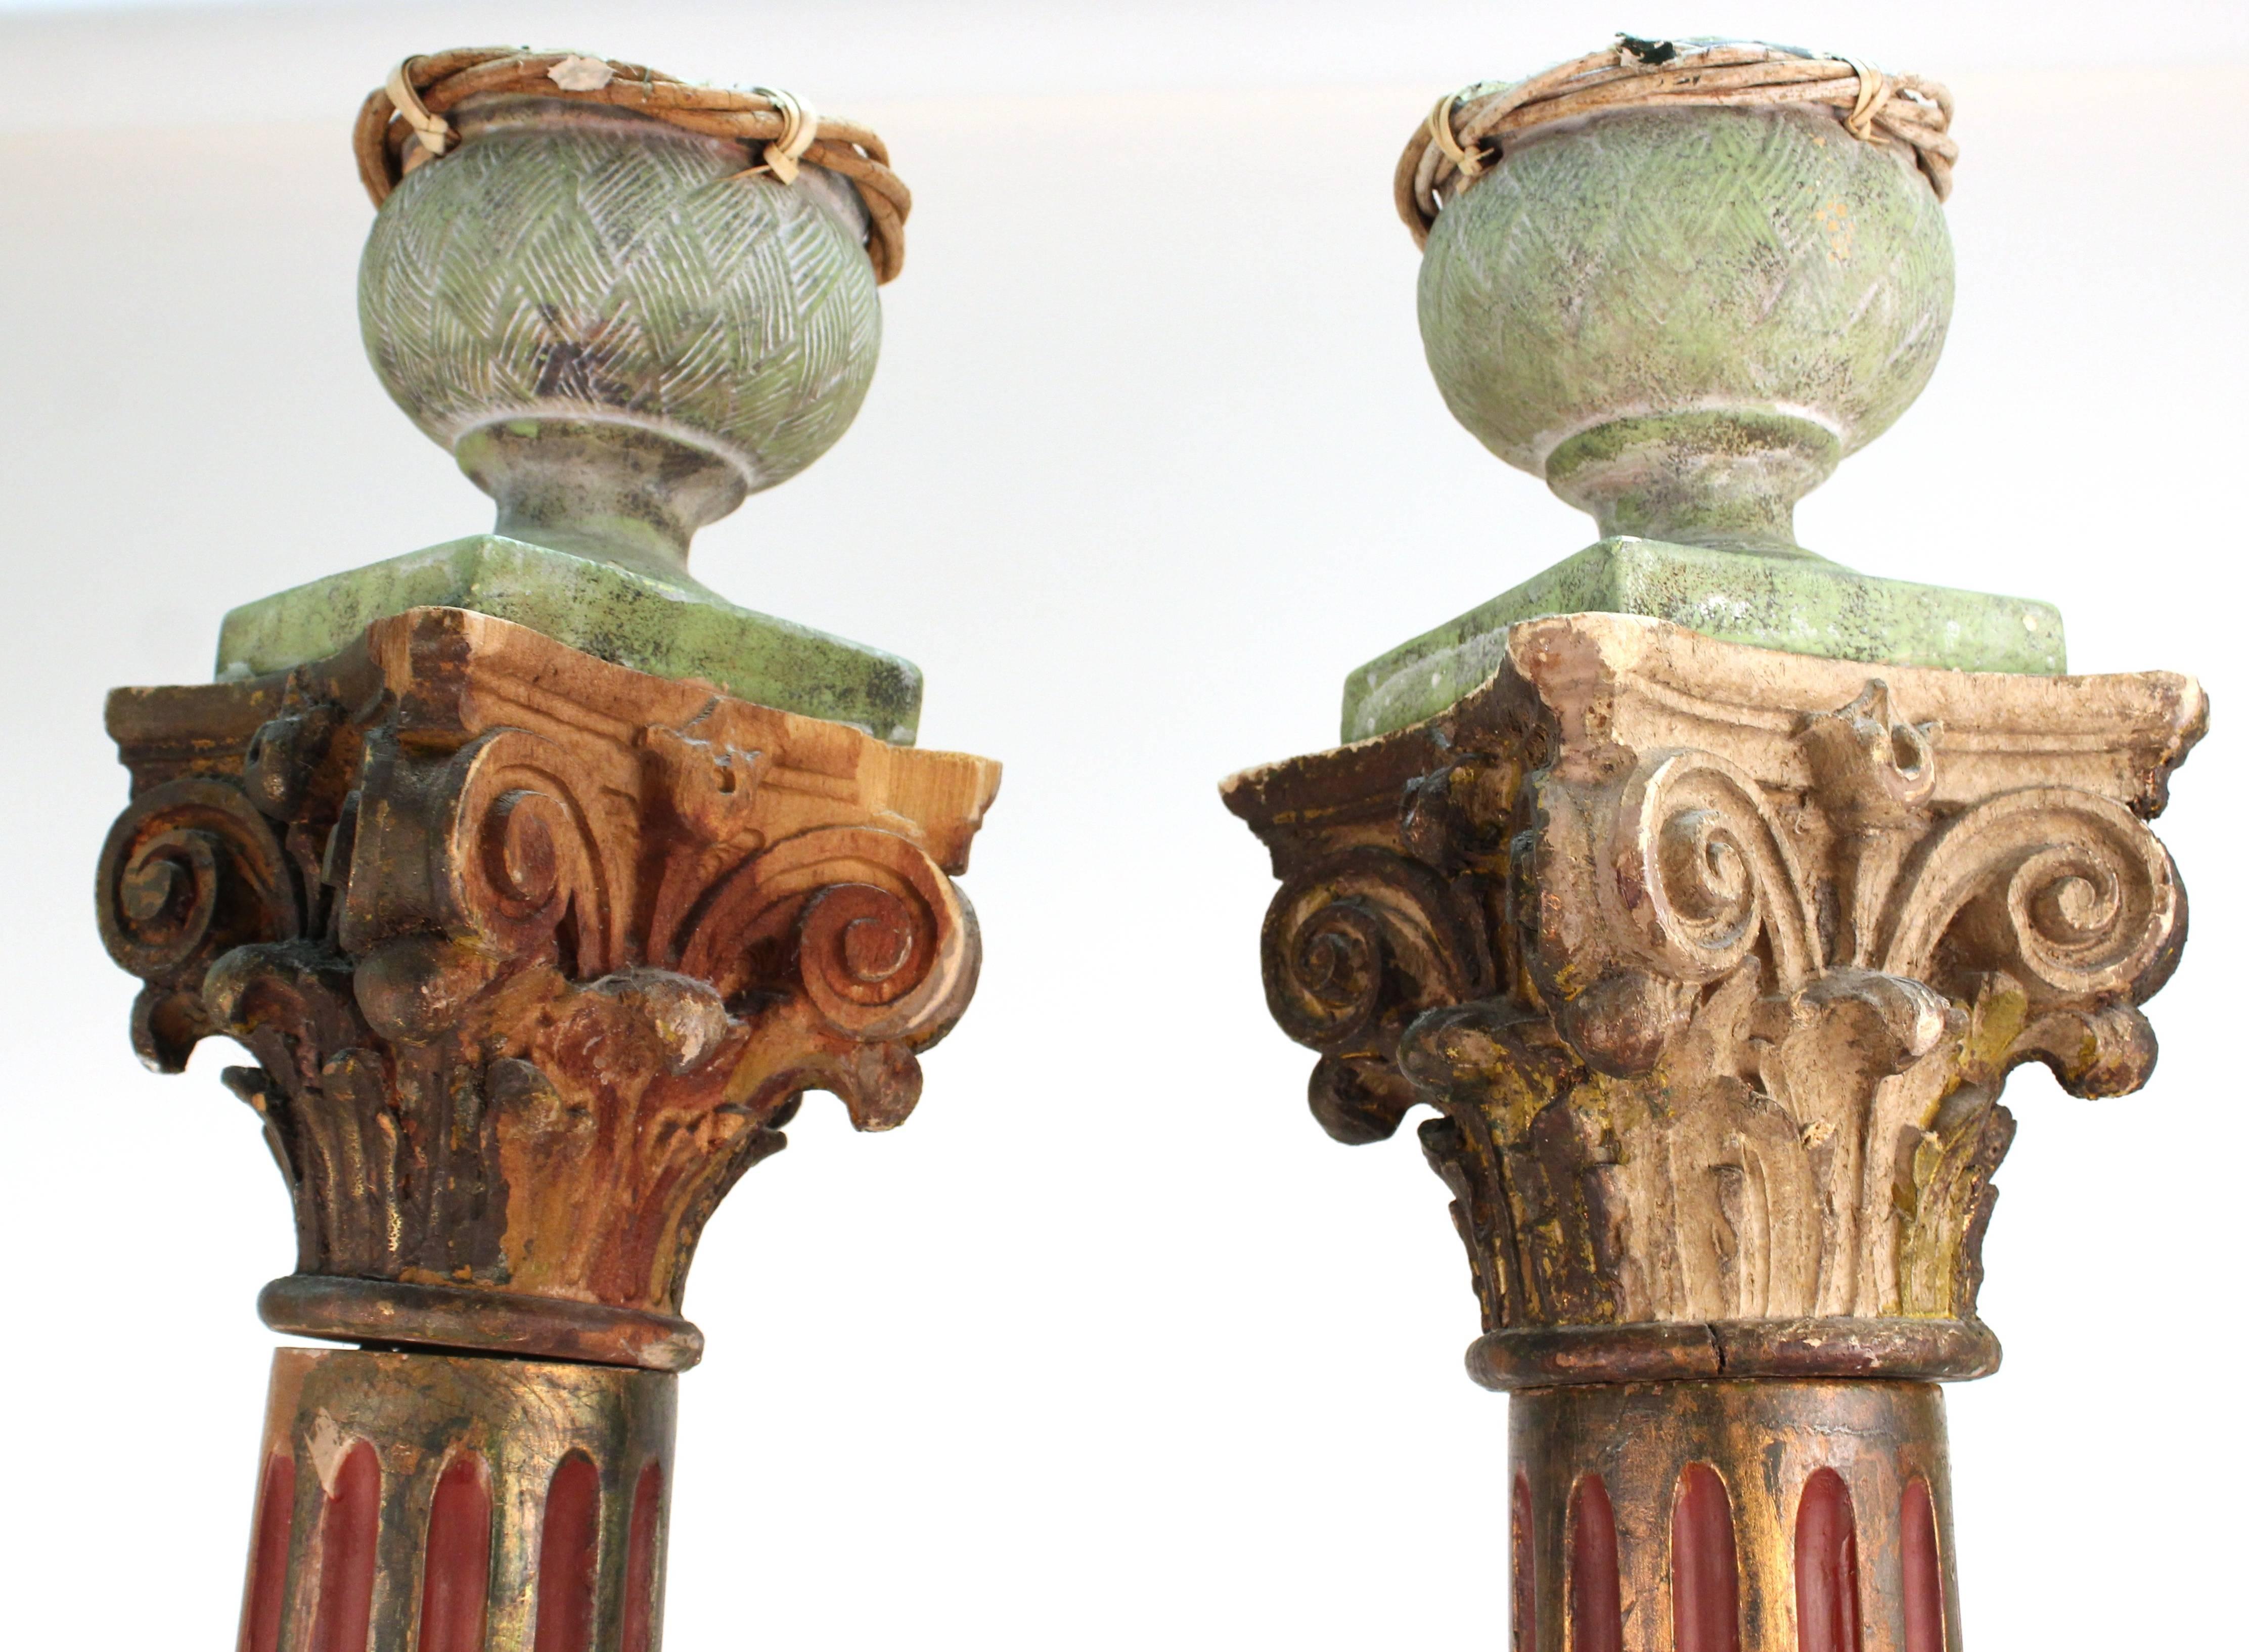 Painted Victorian Wooden Corinthian Columns with Bird Nests on Top